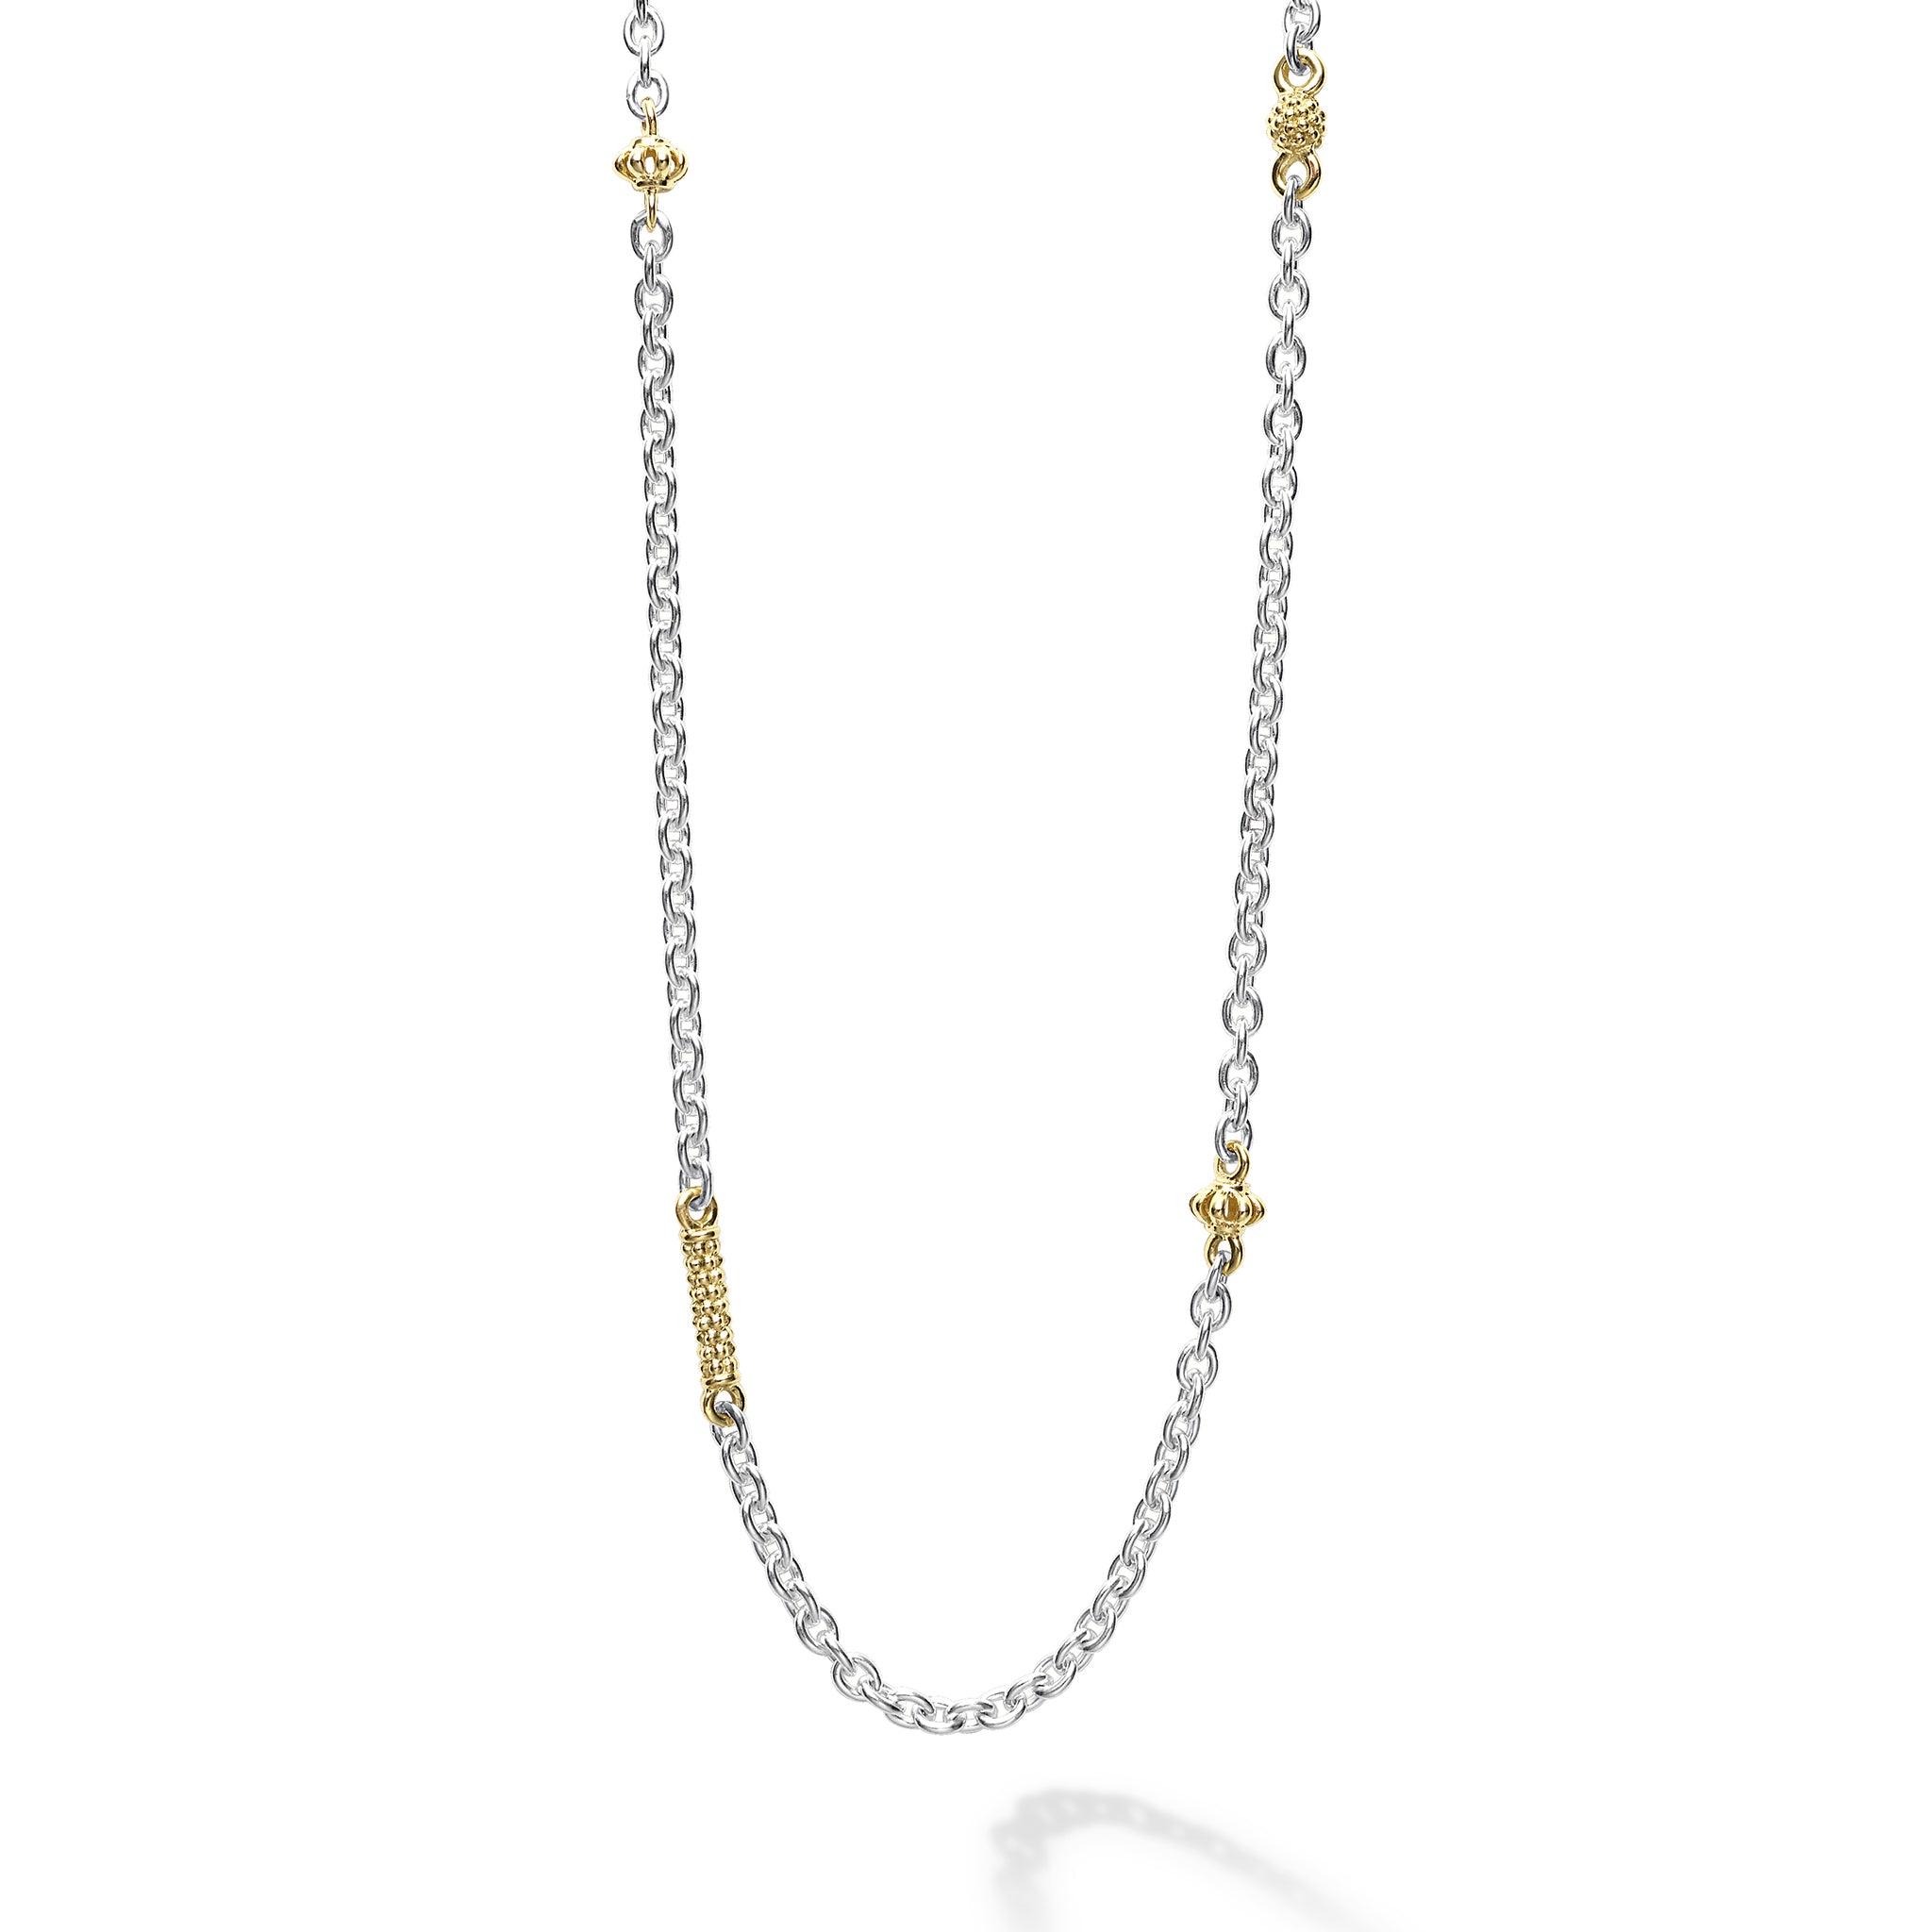 Showroom of Real gold two tone necklace pendant 18kt yellow gold chain  8.690 gm wide 1.23 mm | Jewelxy - 212697